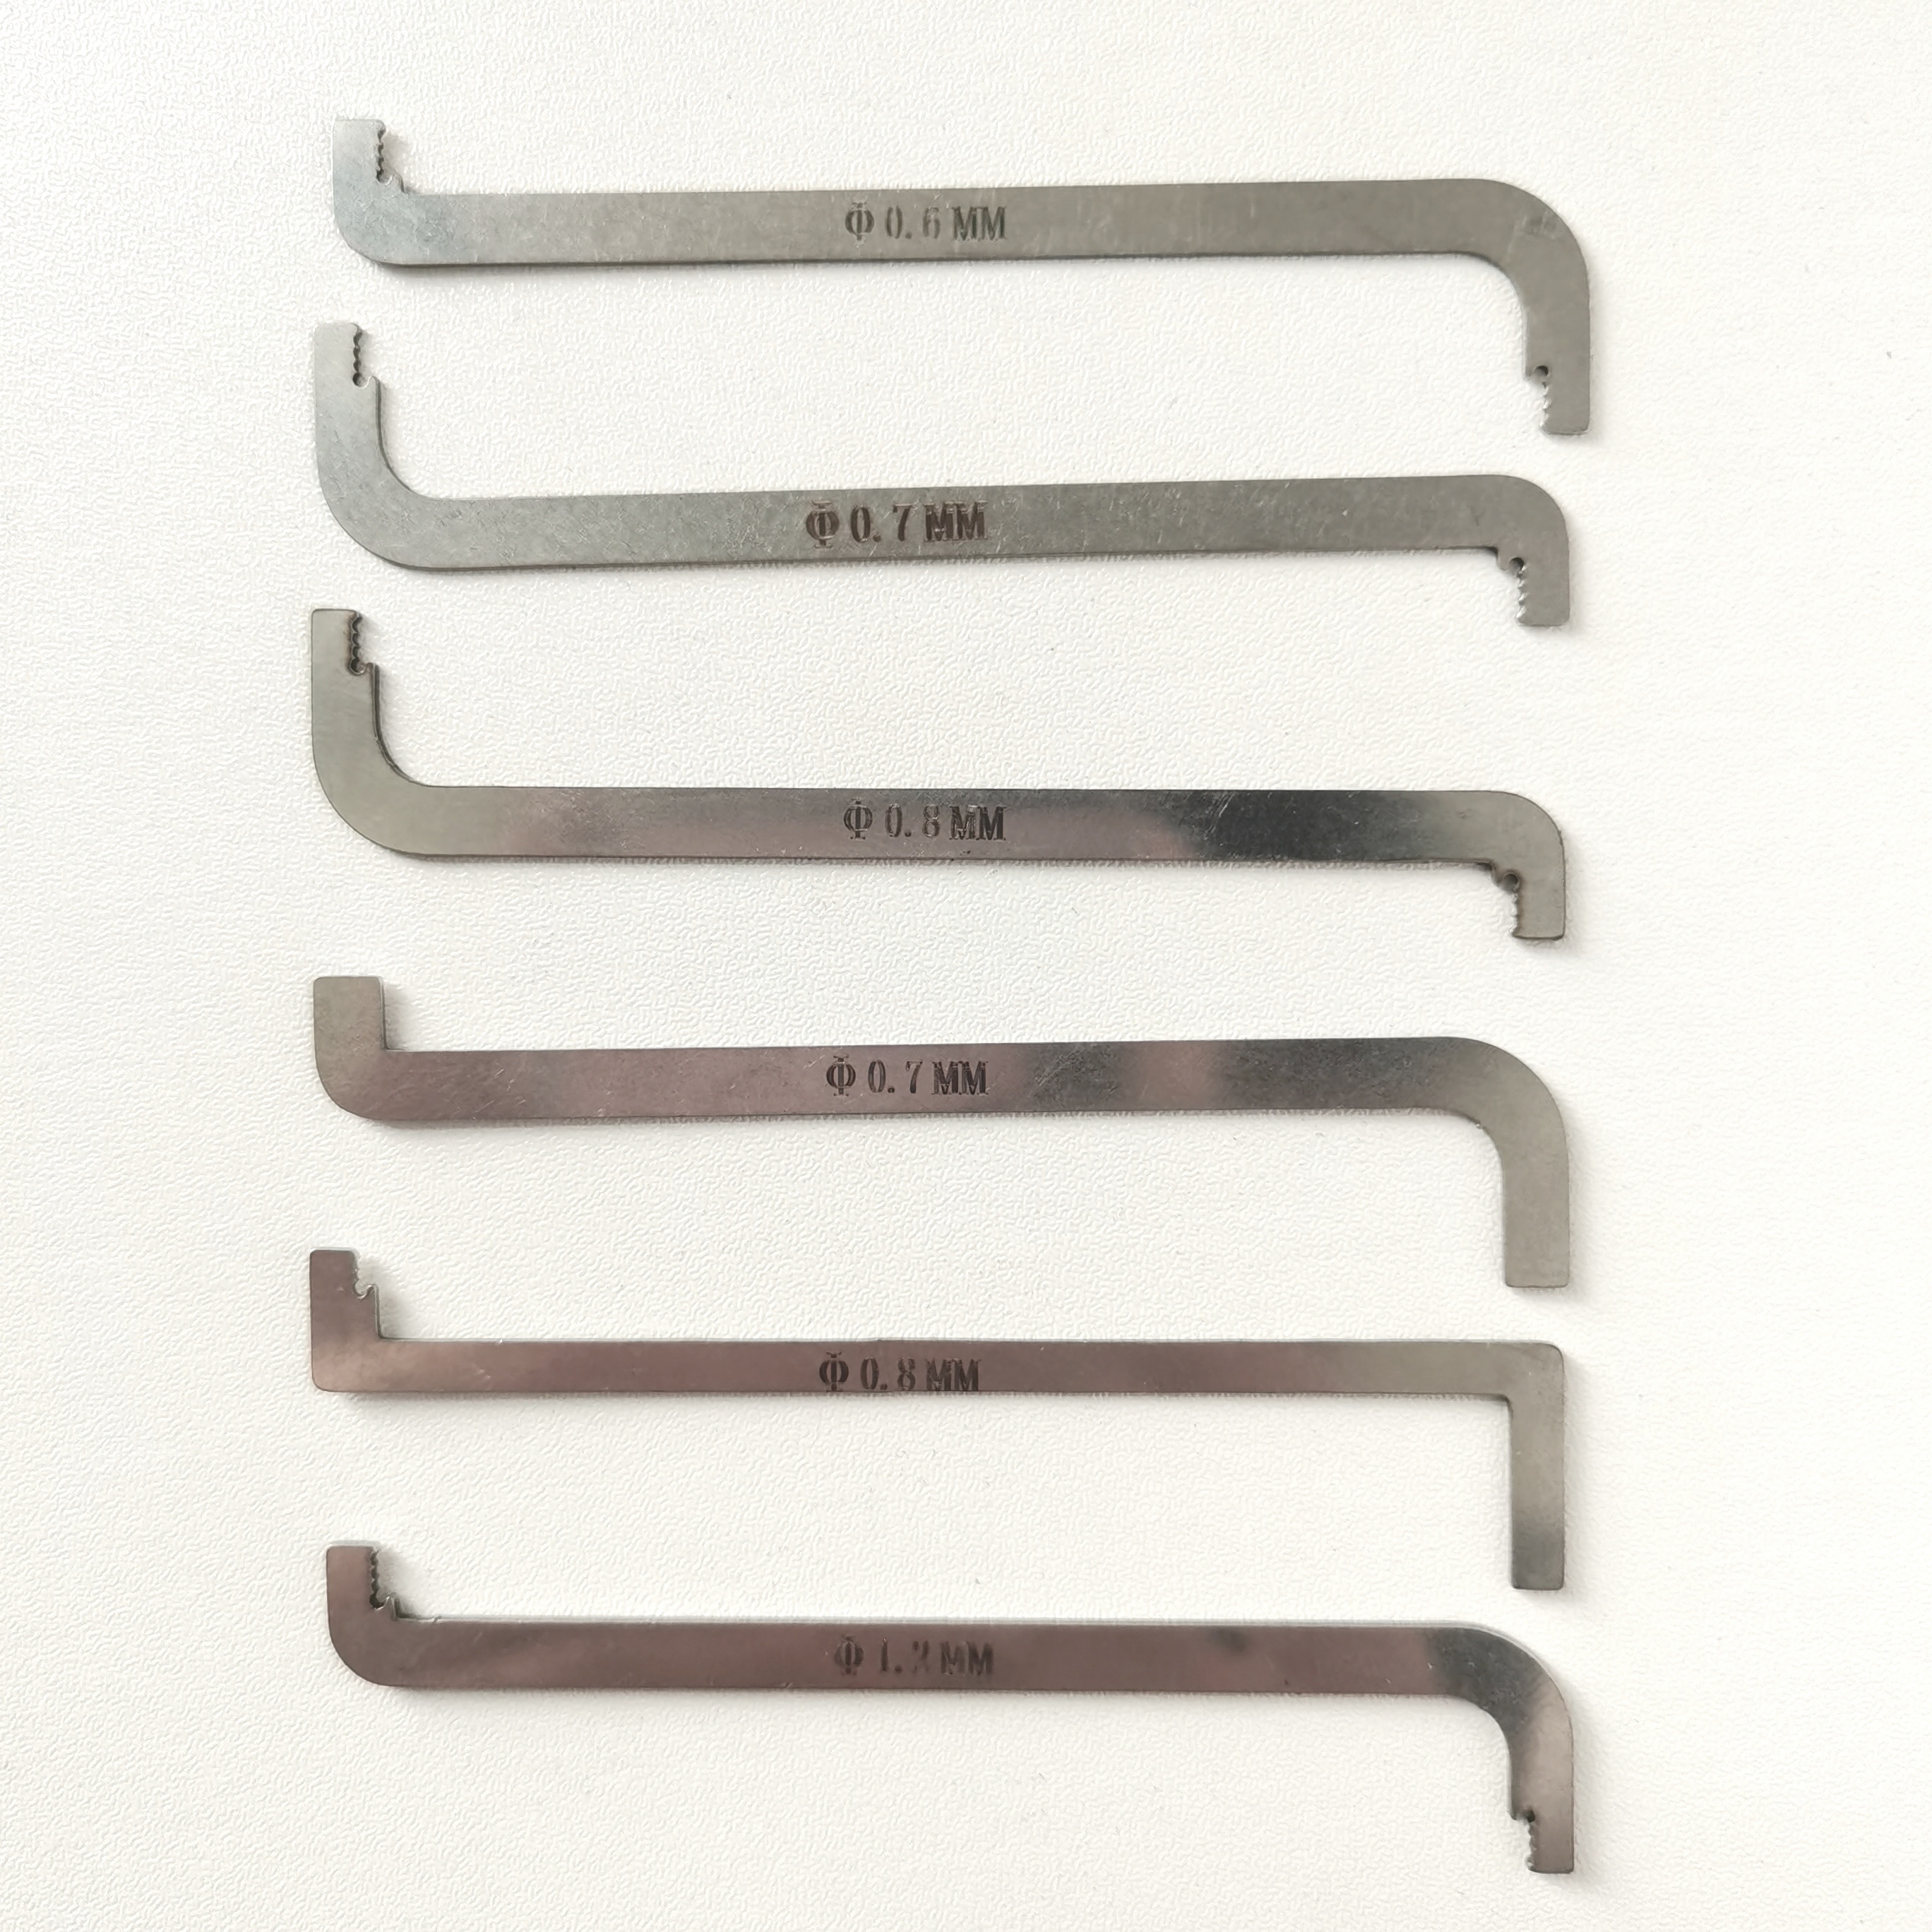 Replacement turning tool, Double head tension wrench, JingPing Locksmith Tool 6 Pieces set